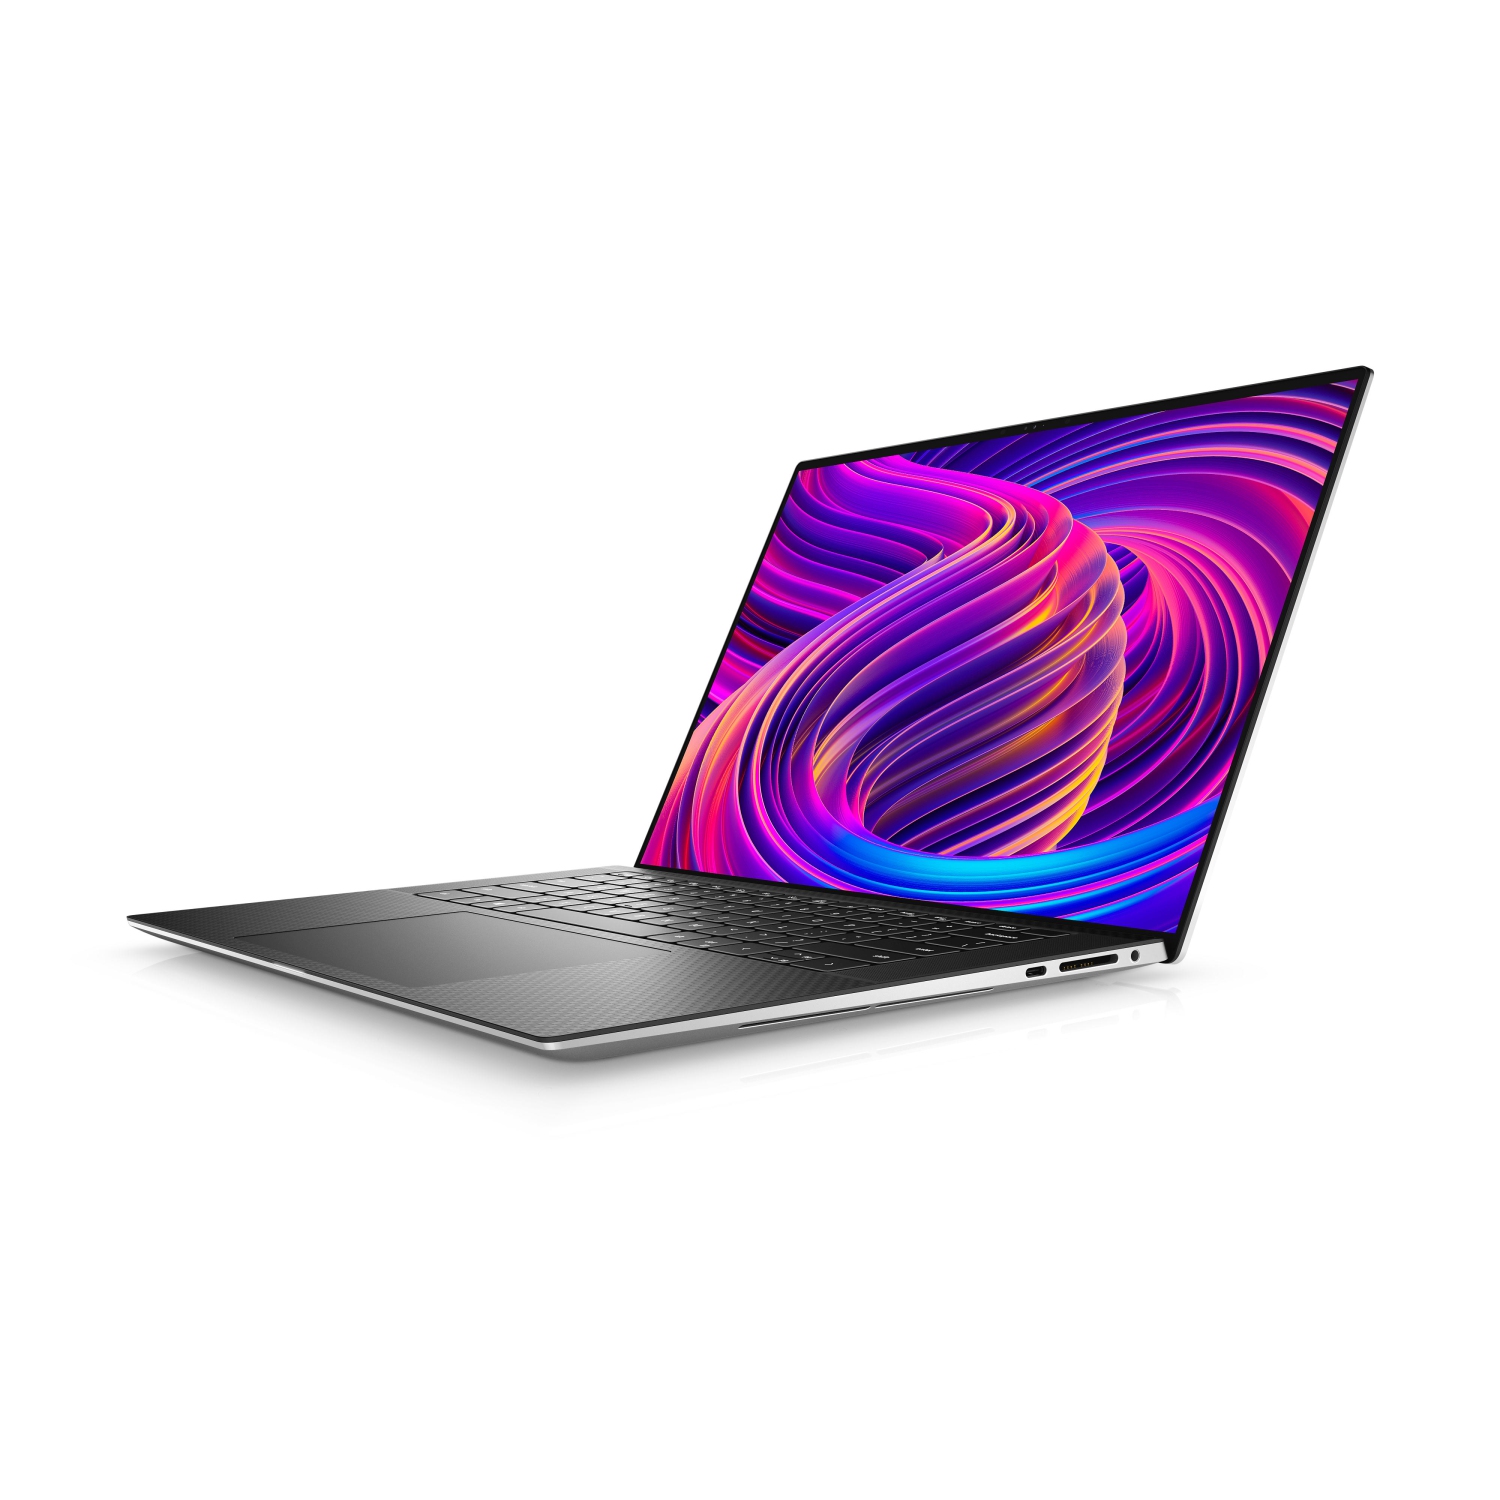 Refurbished (Excellent) - Dell XPS 15 9510 Laptop (2021) | 15.6" FHD+ | Core i9 - 512GB SSD - 32GB RAM - 3050 Ti | 8 Cores @ 4.9 GHz - 11th Gen CPU Certified Refurbished